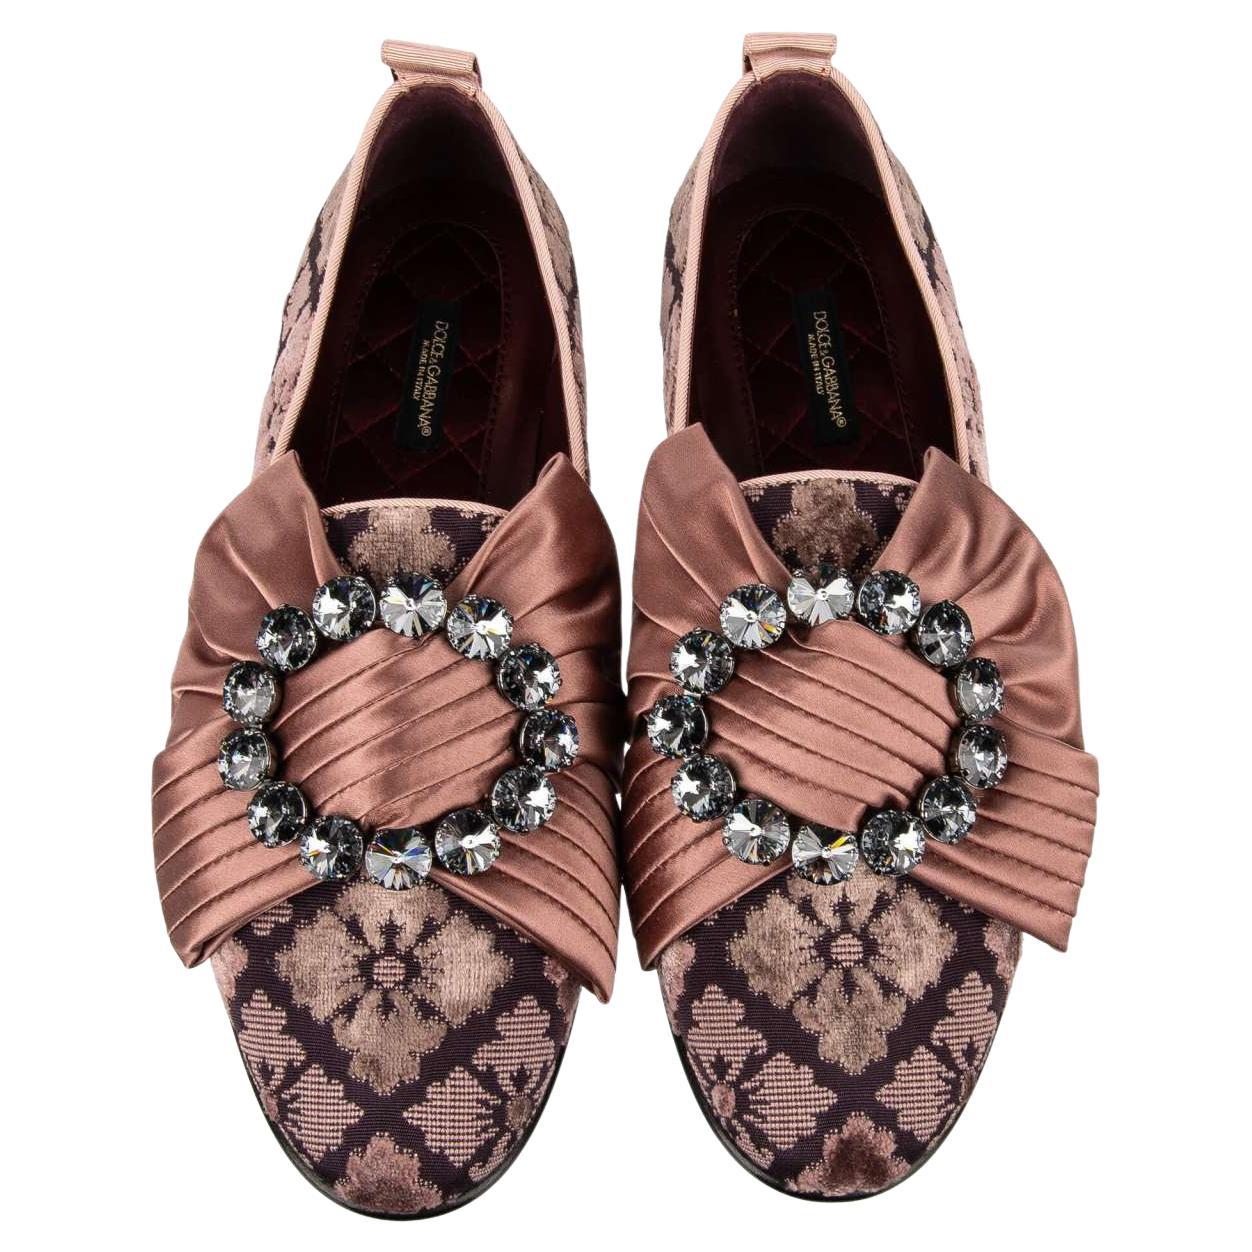 D&G Jacquard Loafer Ballet Flats Shoes YOUNG QUEEN w. Crystal Brooch Pink 39 9 For Sale